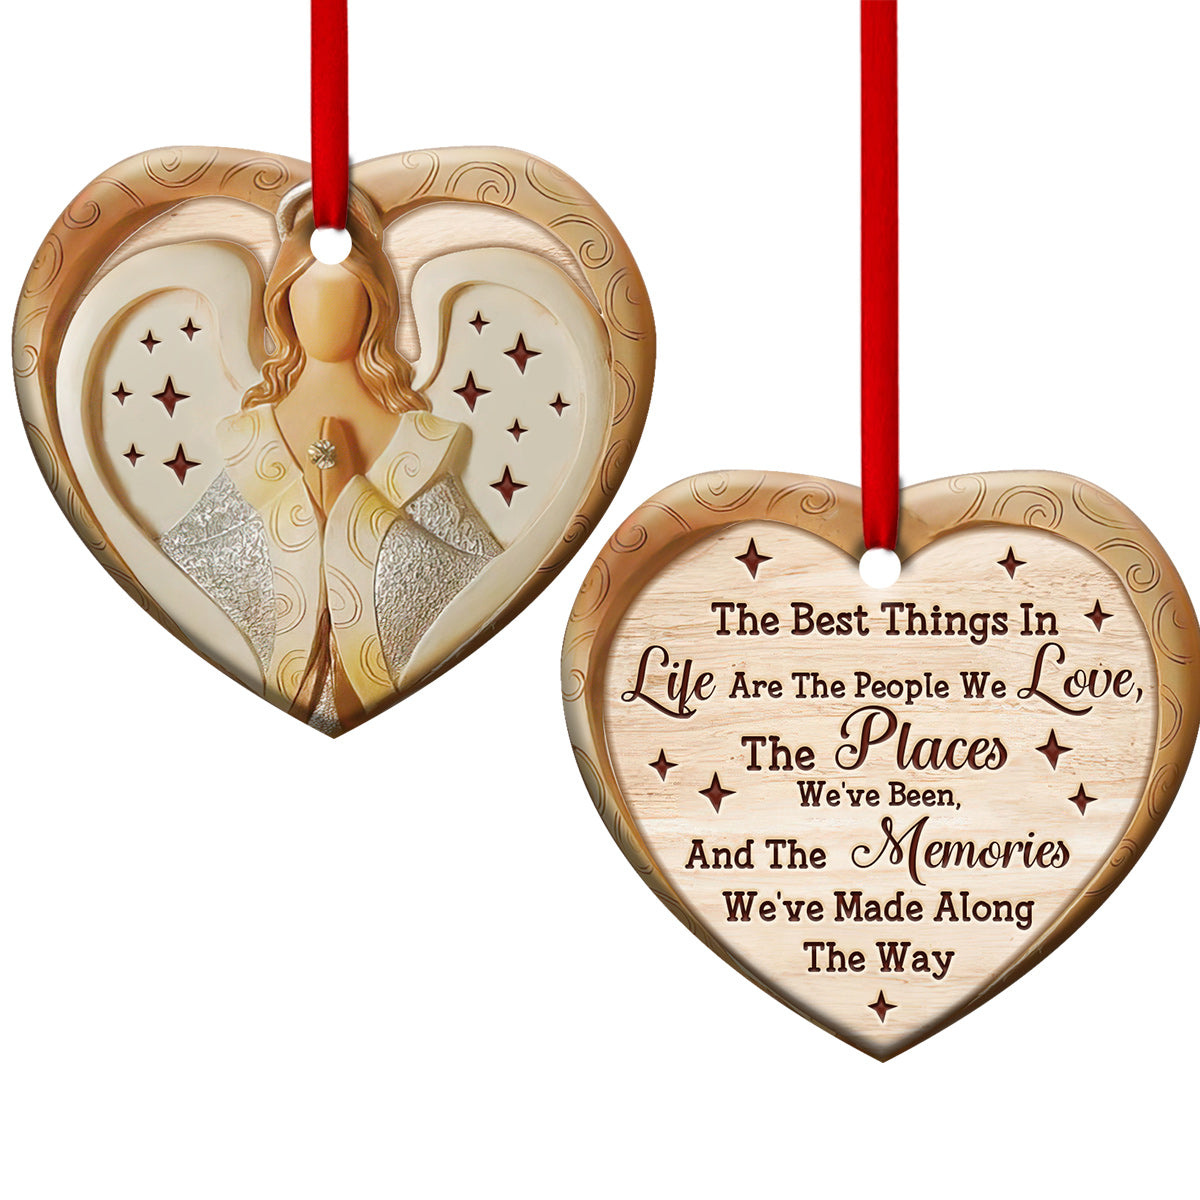 angel-the-best-things-in-life-are-the-people-we-love-heart-ornament